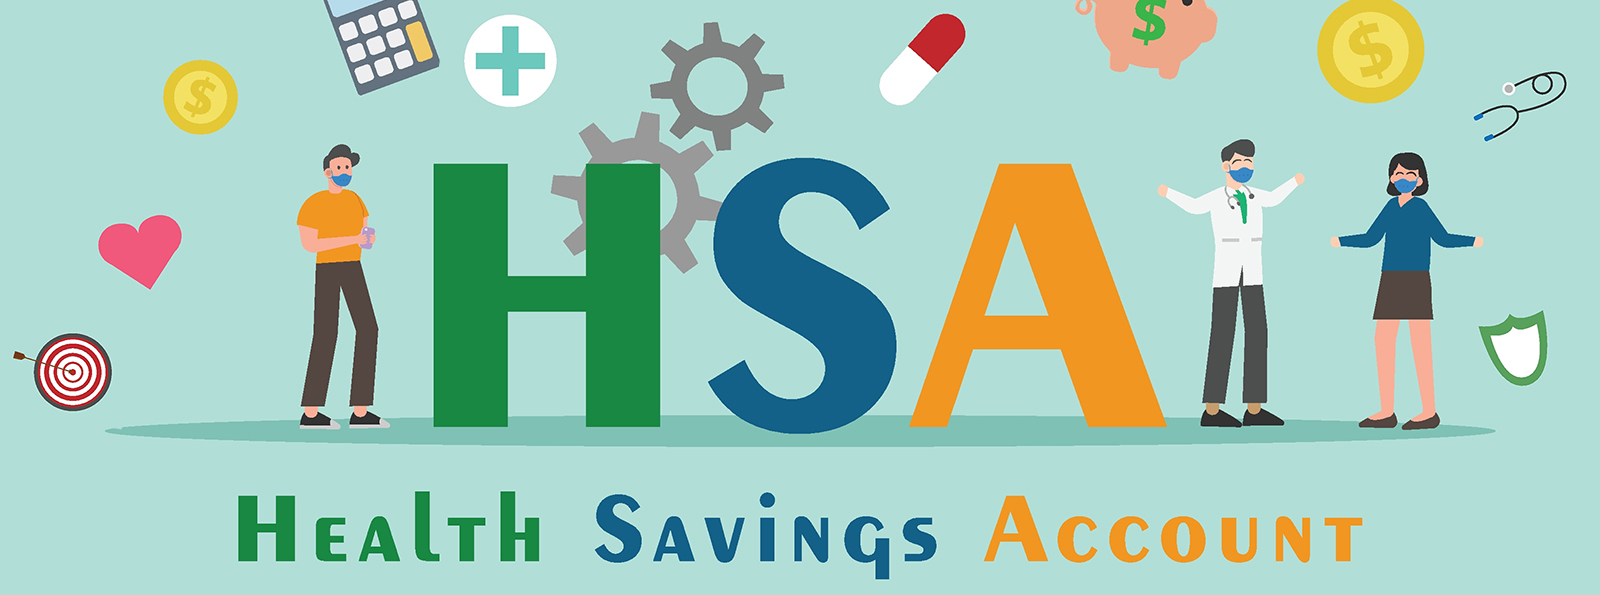 An illustartion of medical stuff, people and "HSA" written on a sky blue background